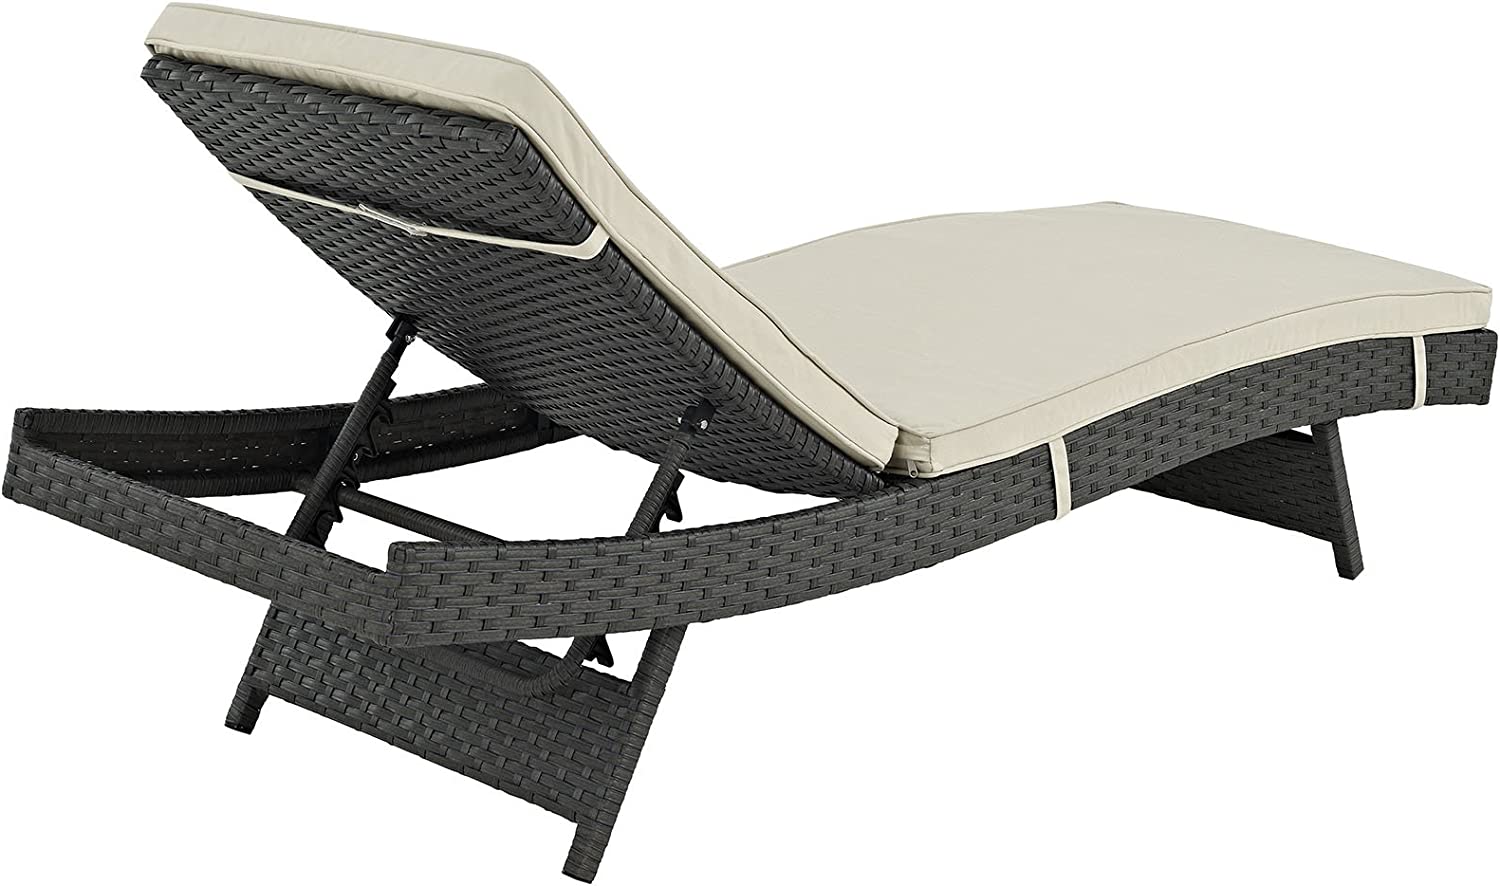 Modway Sojourn Wicker Rattan Outdoor Patio Sunbrella Fabric Chaise Lounge in Antique Canvas Beige